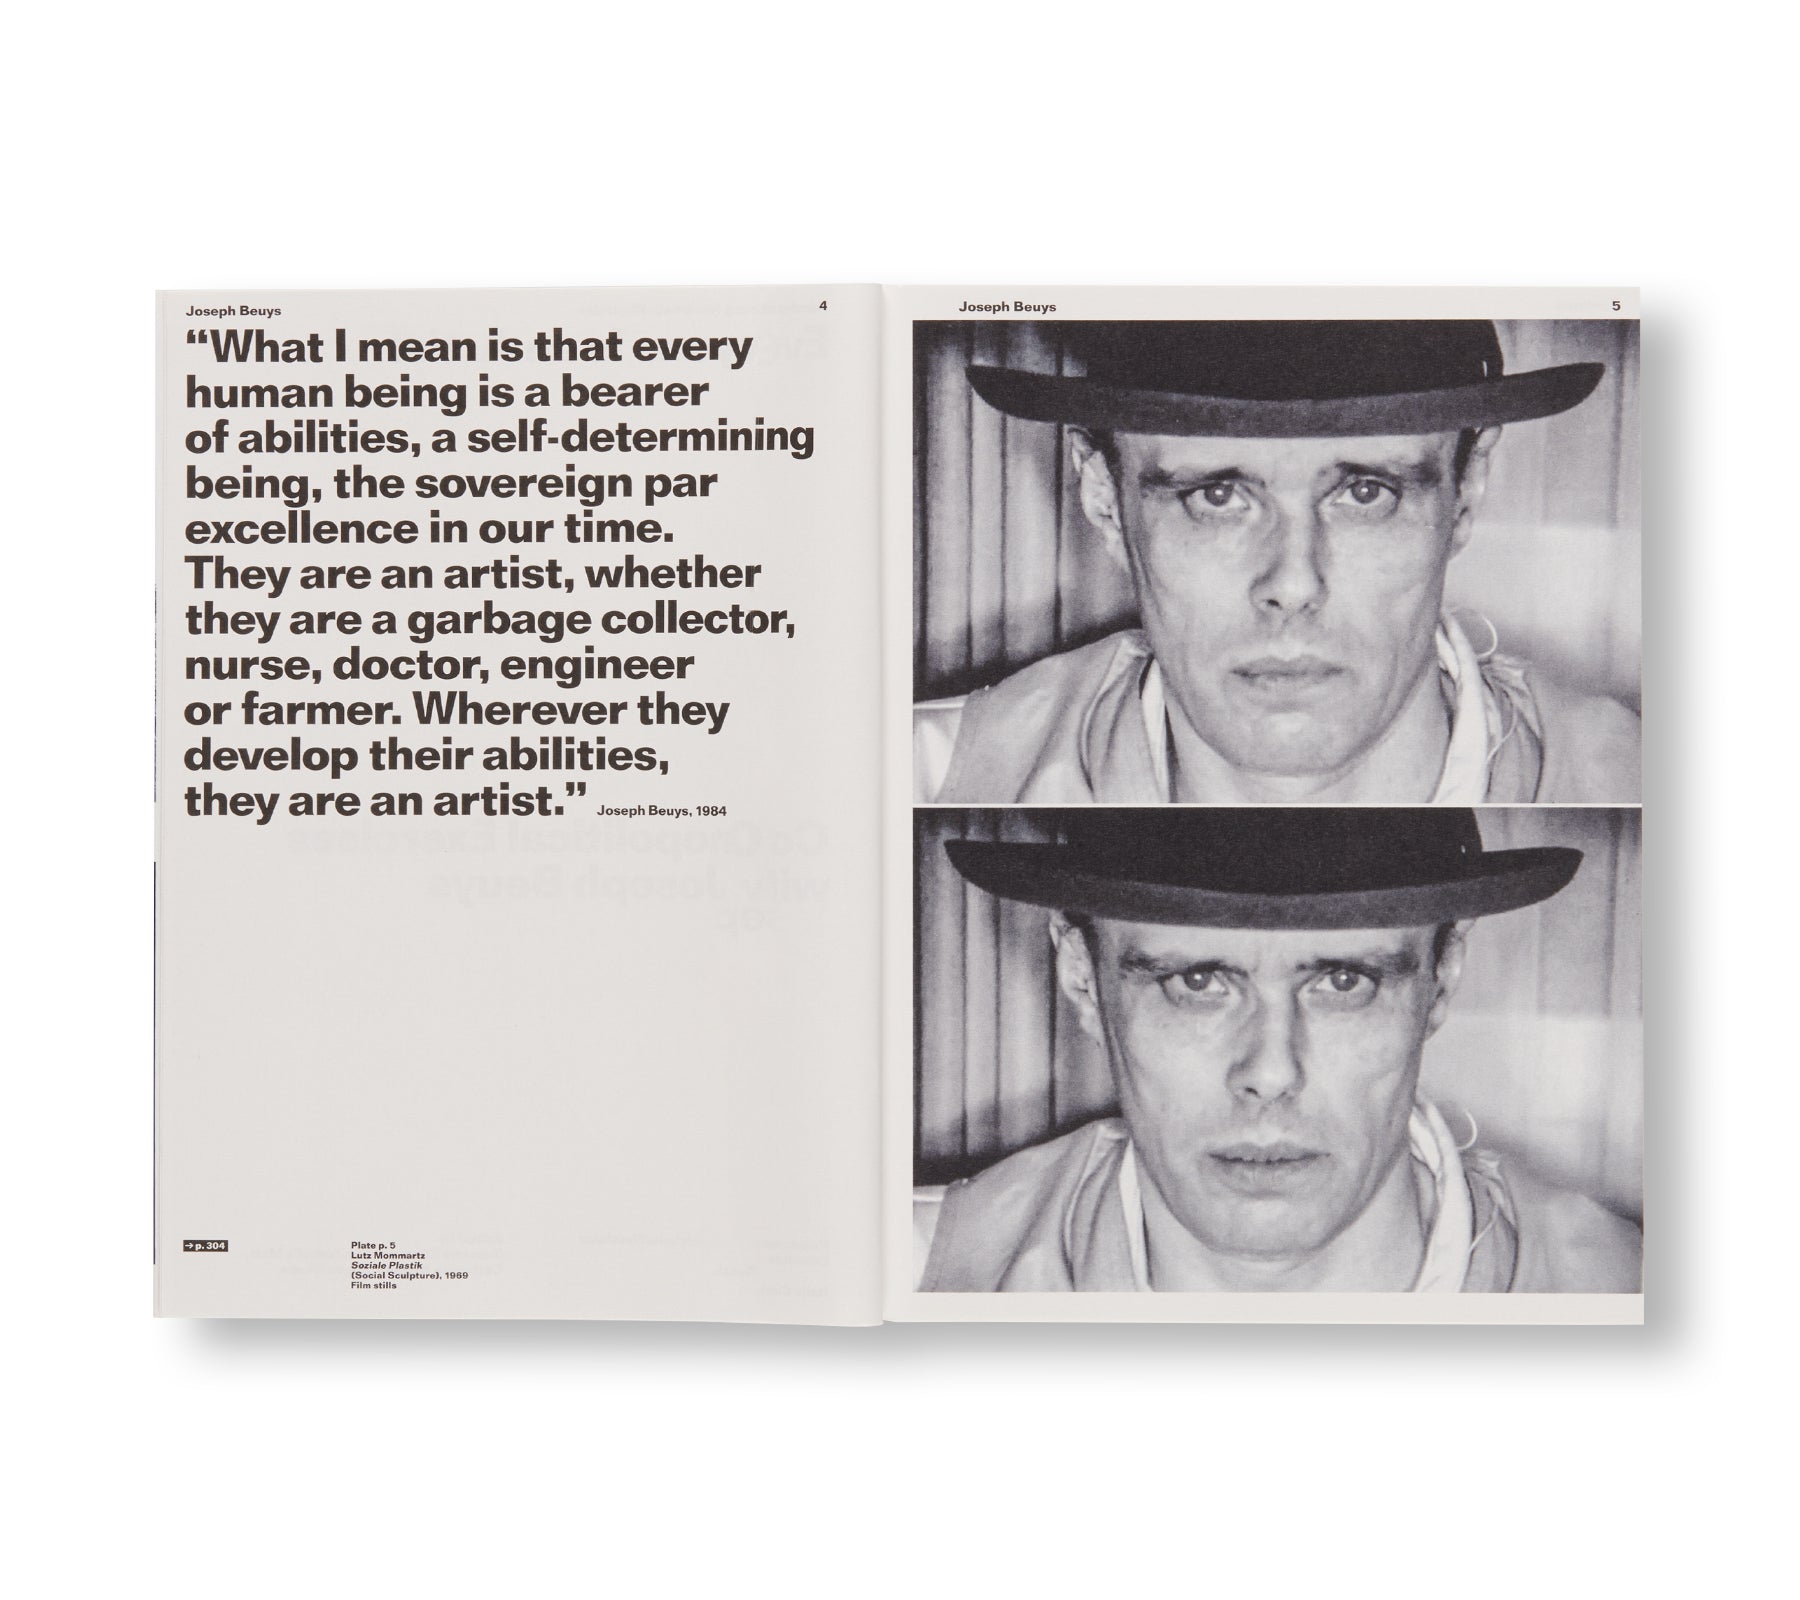 EVERYONE IS AN ARTIST: COSMOPOLITICAL EXERCISES WITH JOSEPH BEUYS